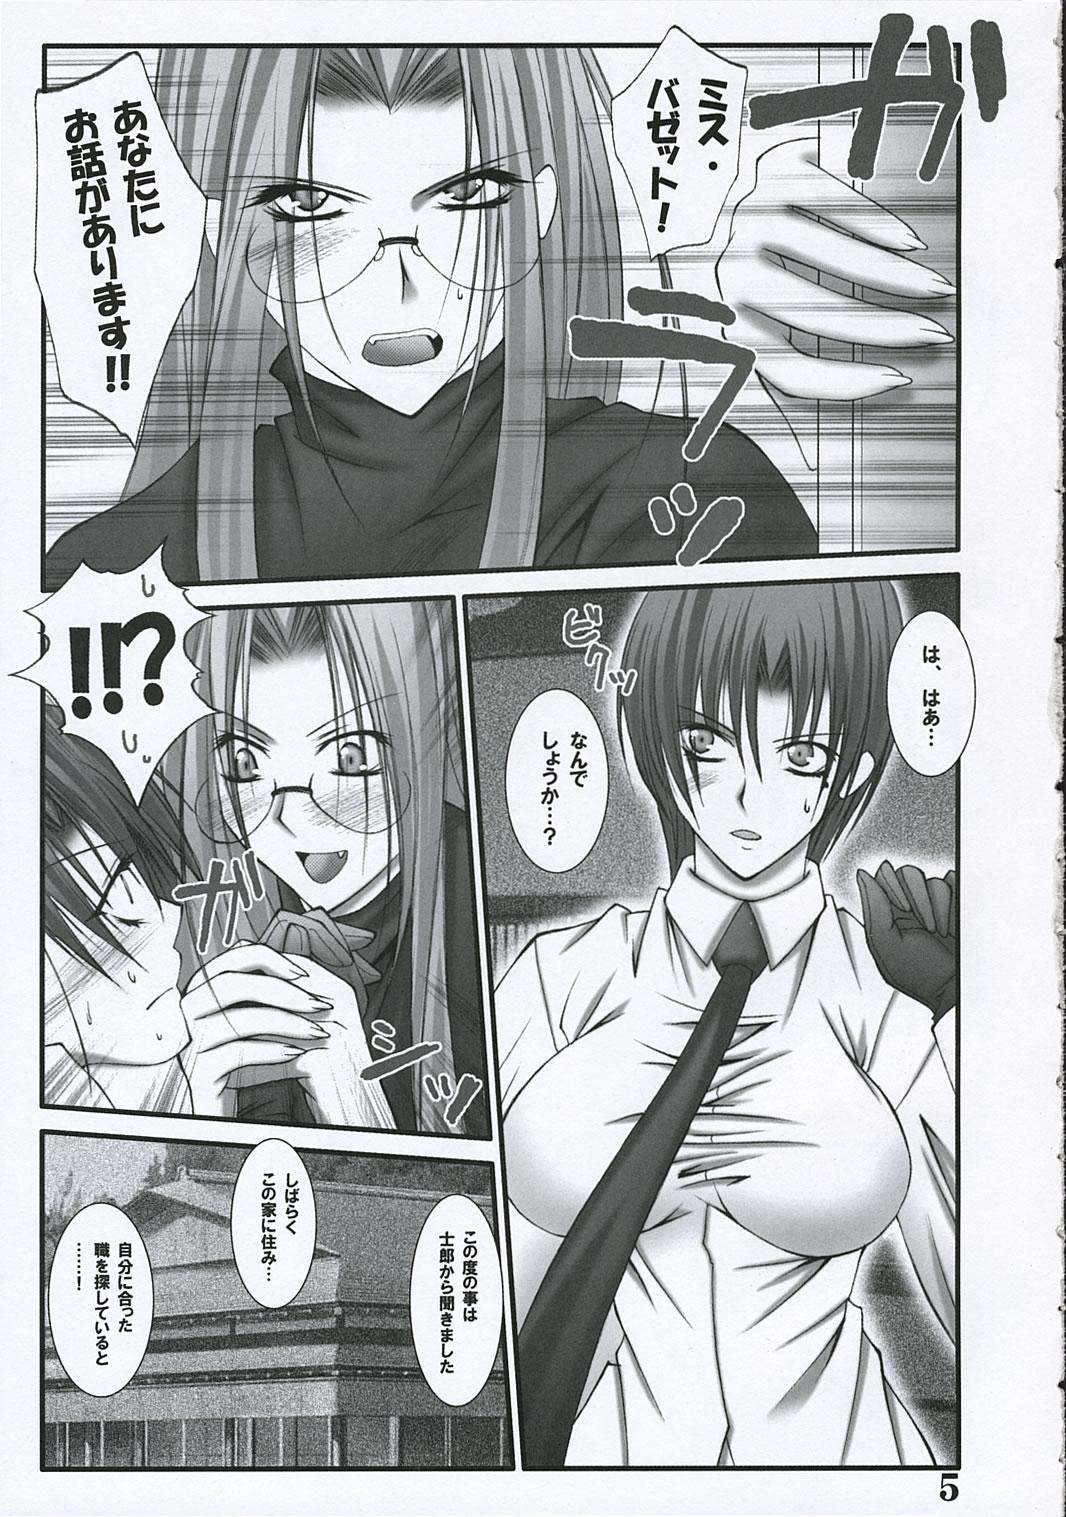 Lesbo SEVENTH HEAVENS - Fate hollow ataraxia Ass Lick - Page 4